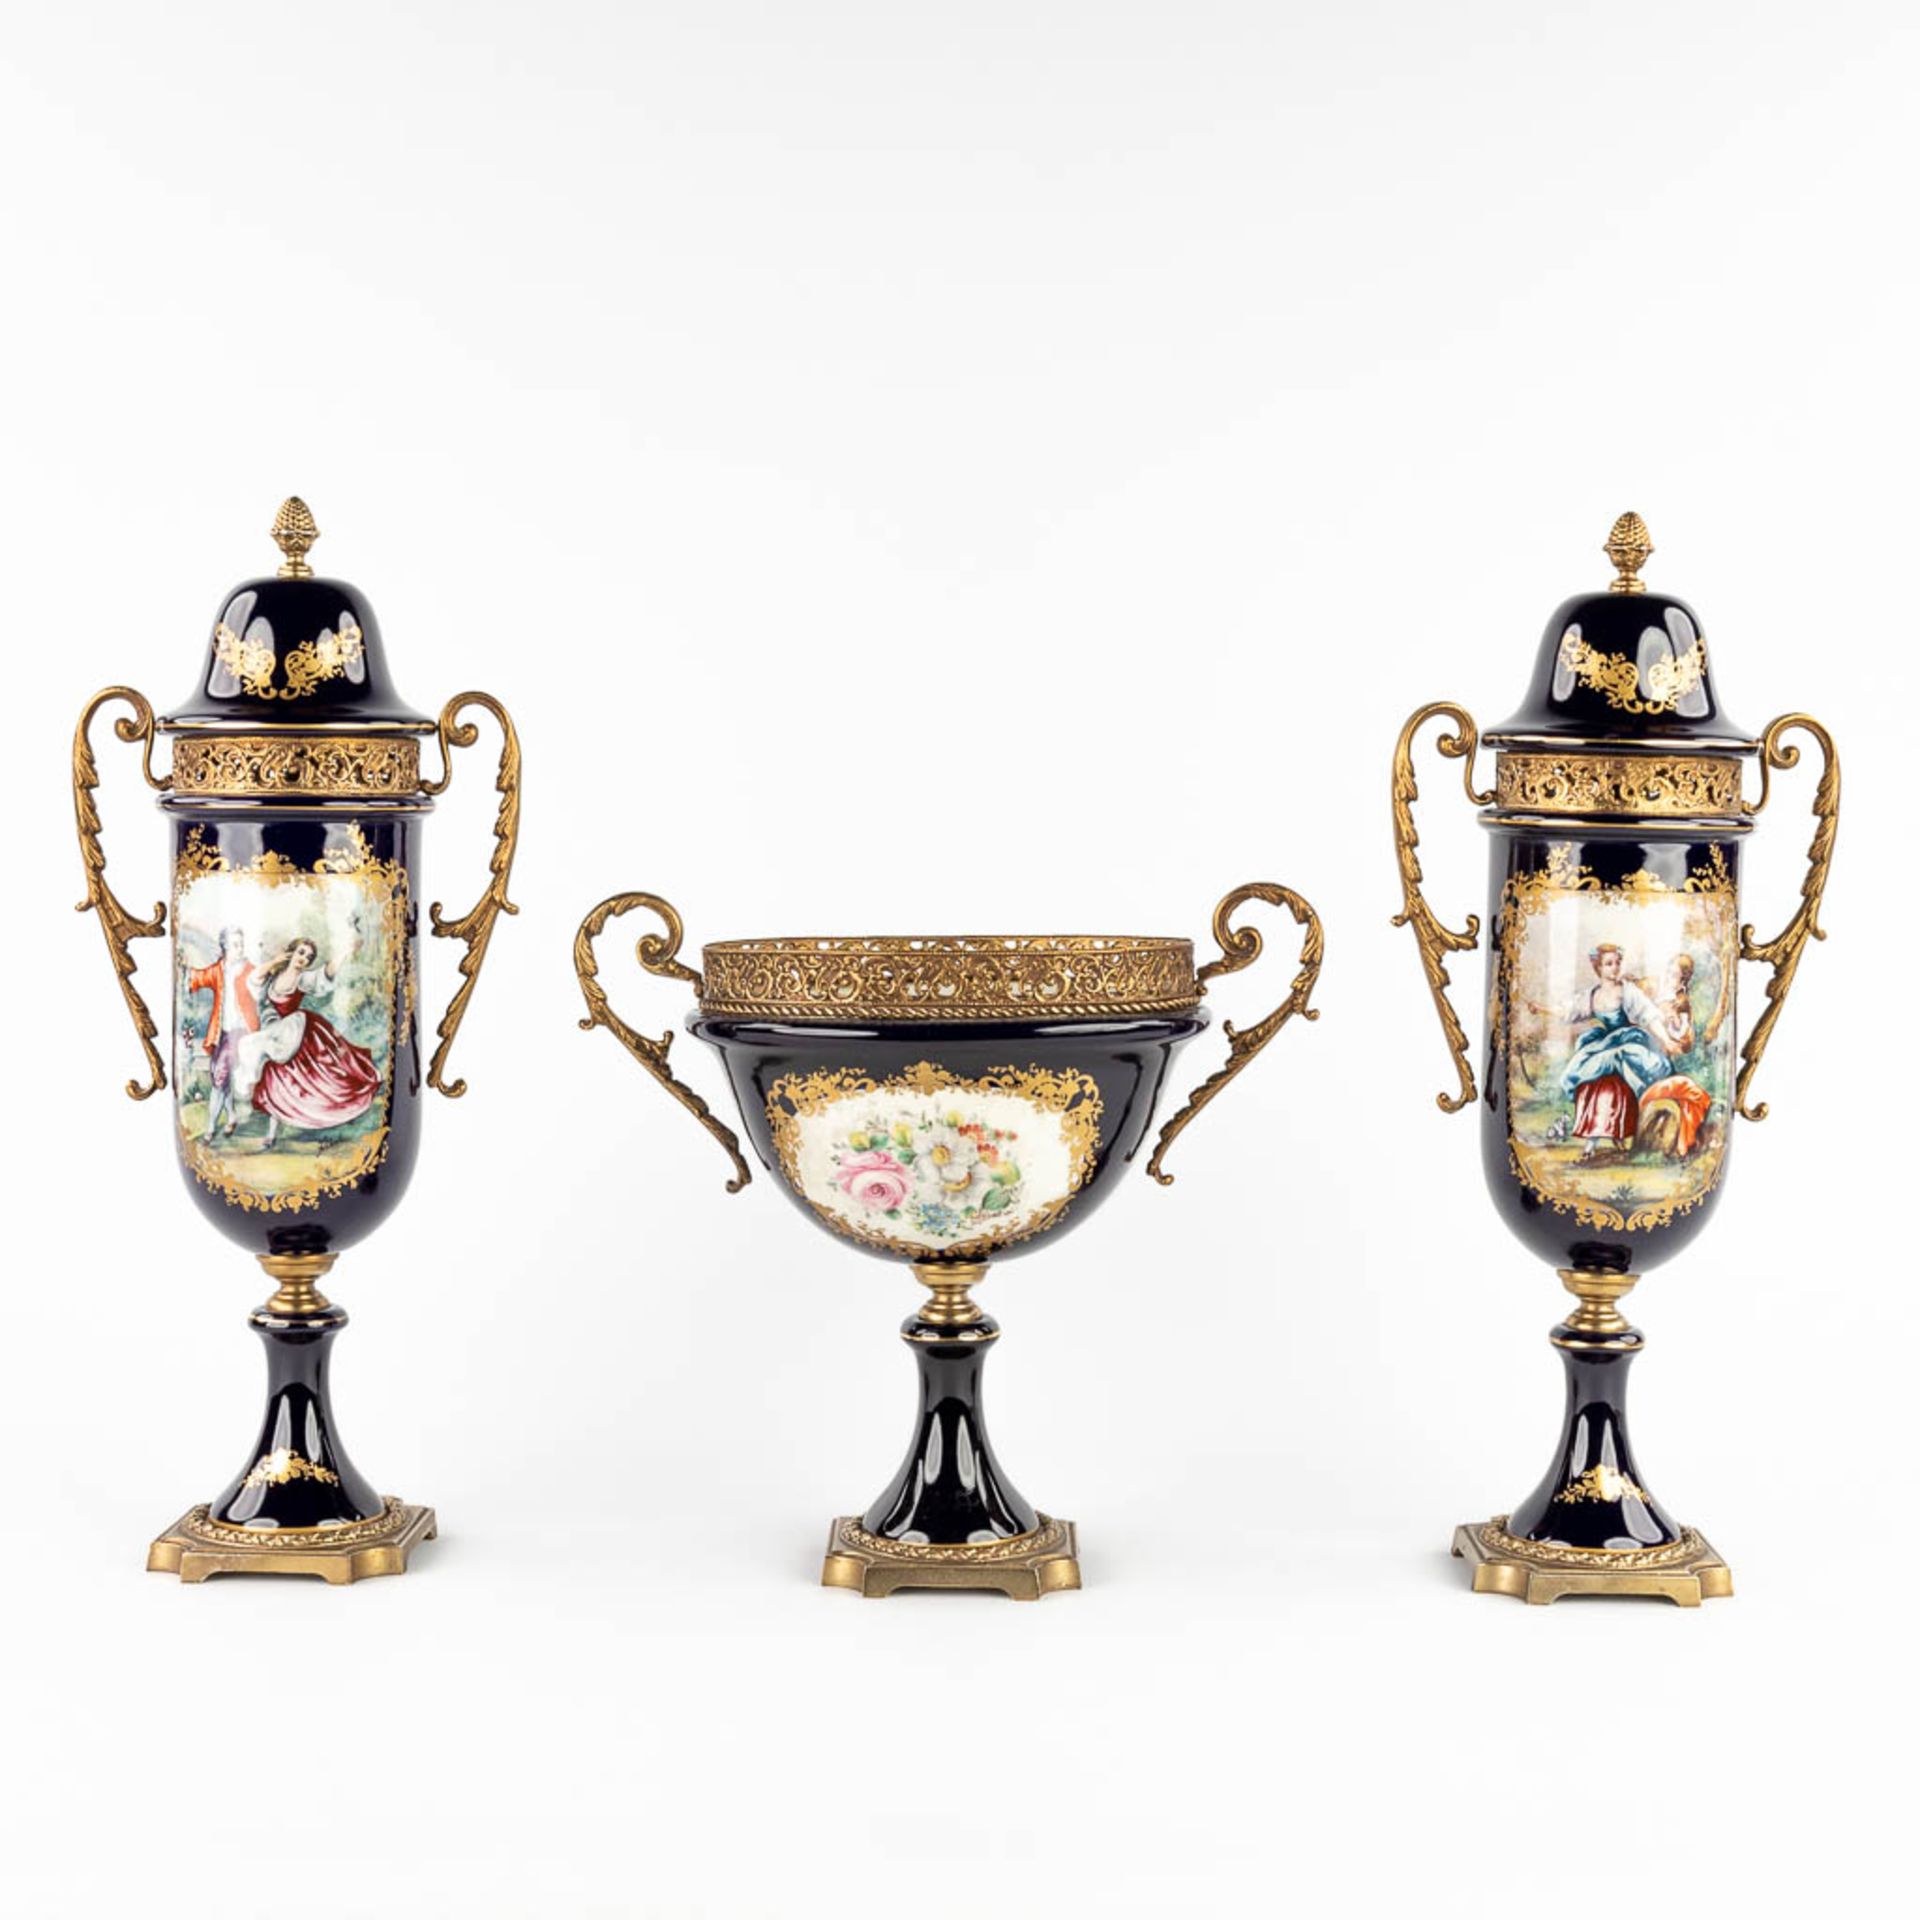 A three-piece mantle garniture, marked A.C.F. Sèvres. Porcelain mounted with bronze. 20th C. (L:11 x